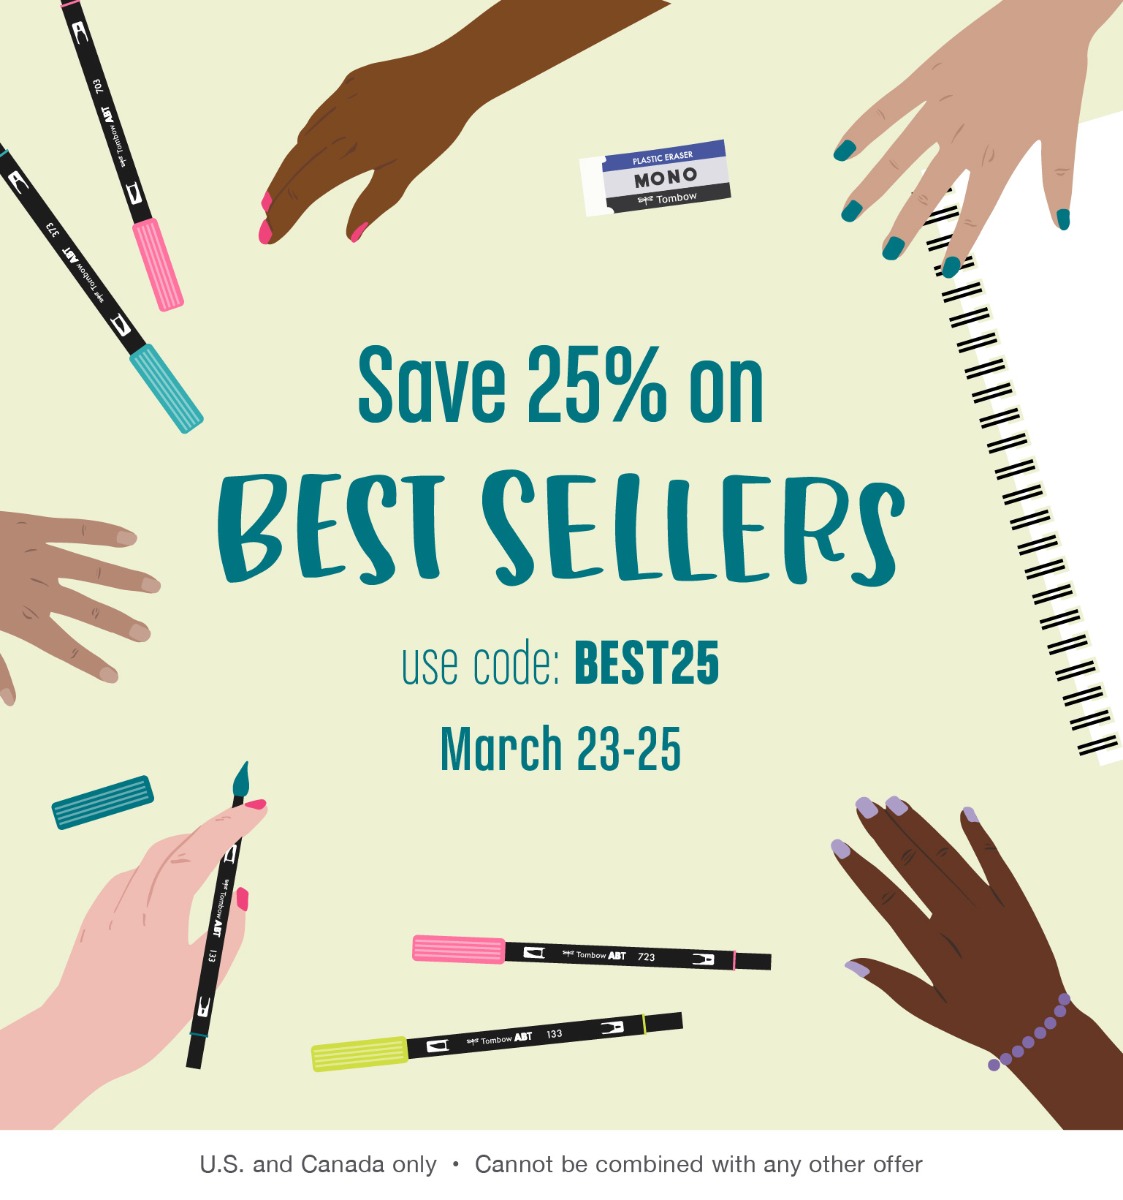 Save 25% on Tombow's best selling items with code 